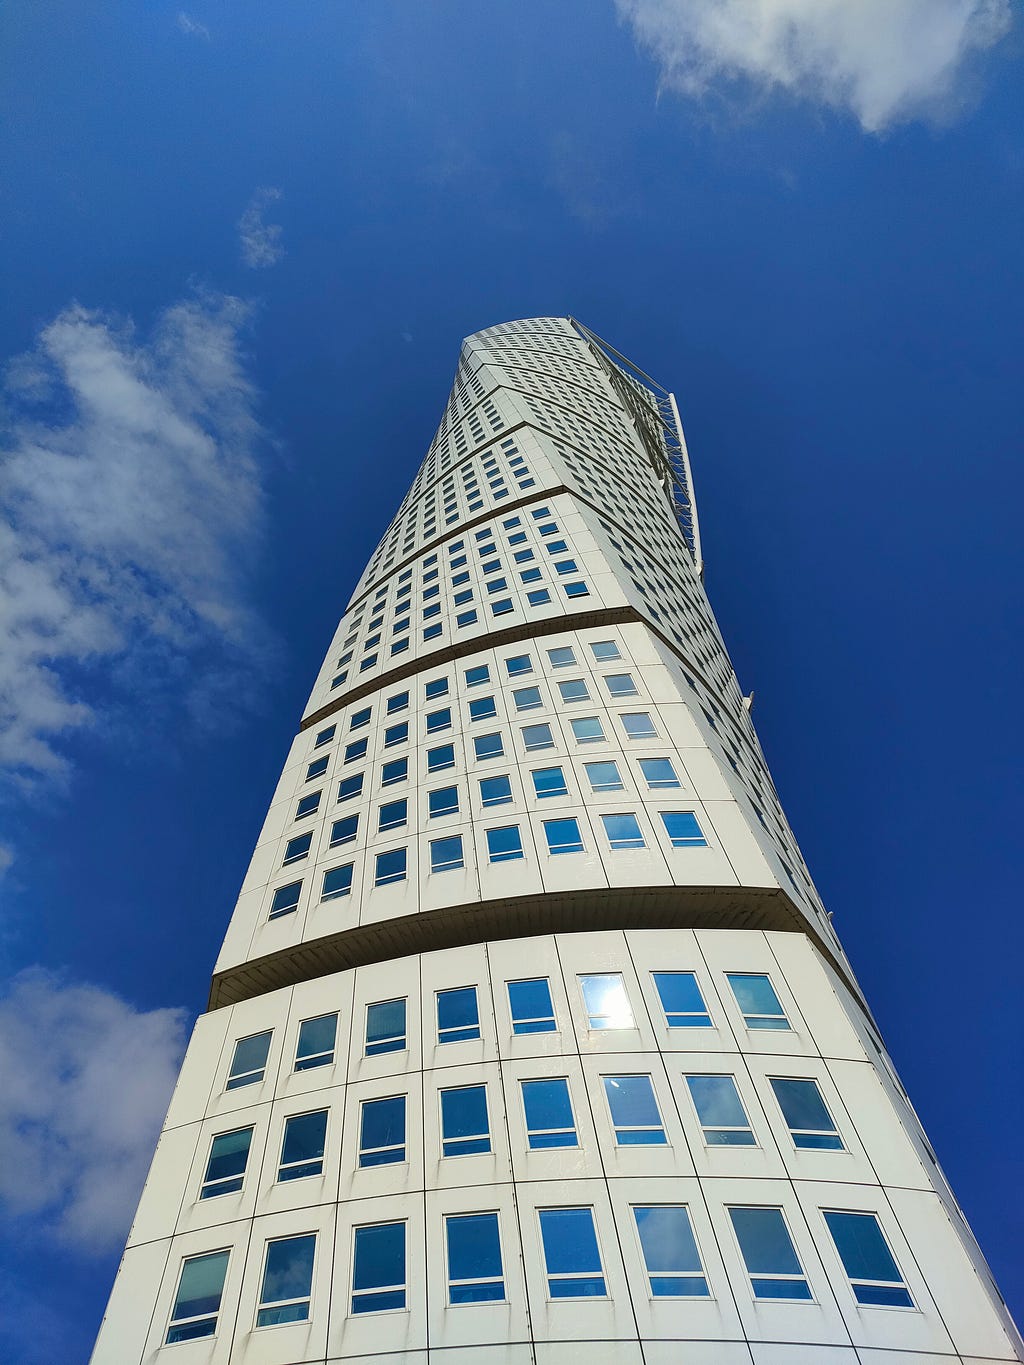 Photograph looking up at the Turning Torso building